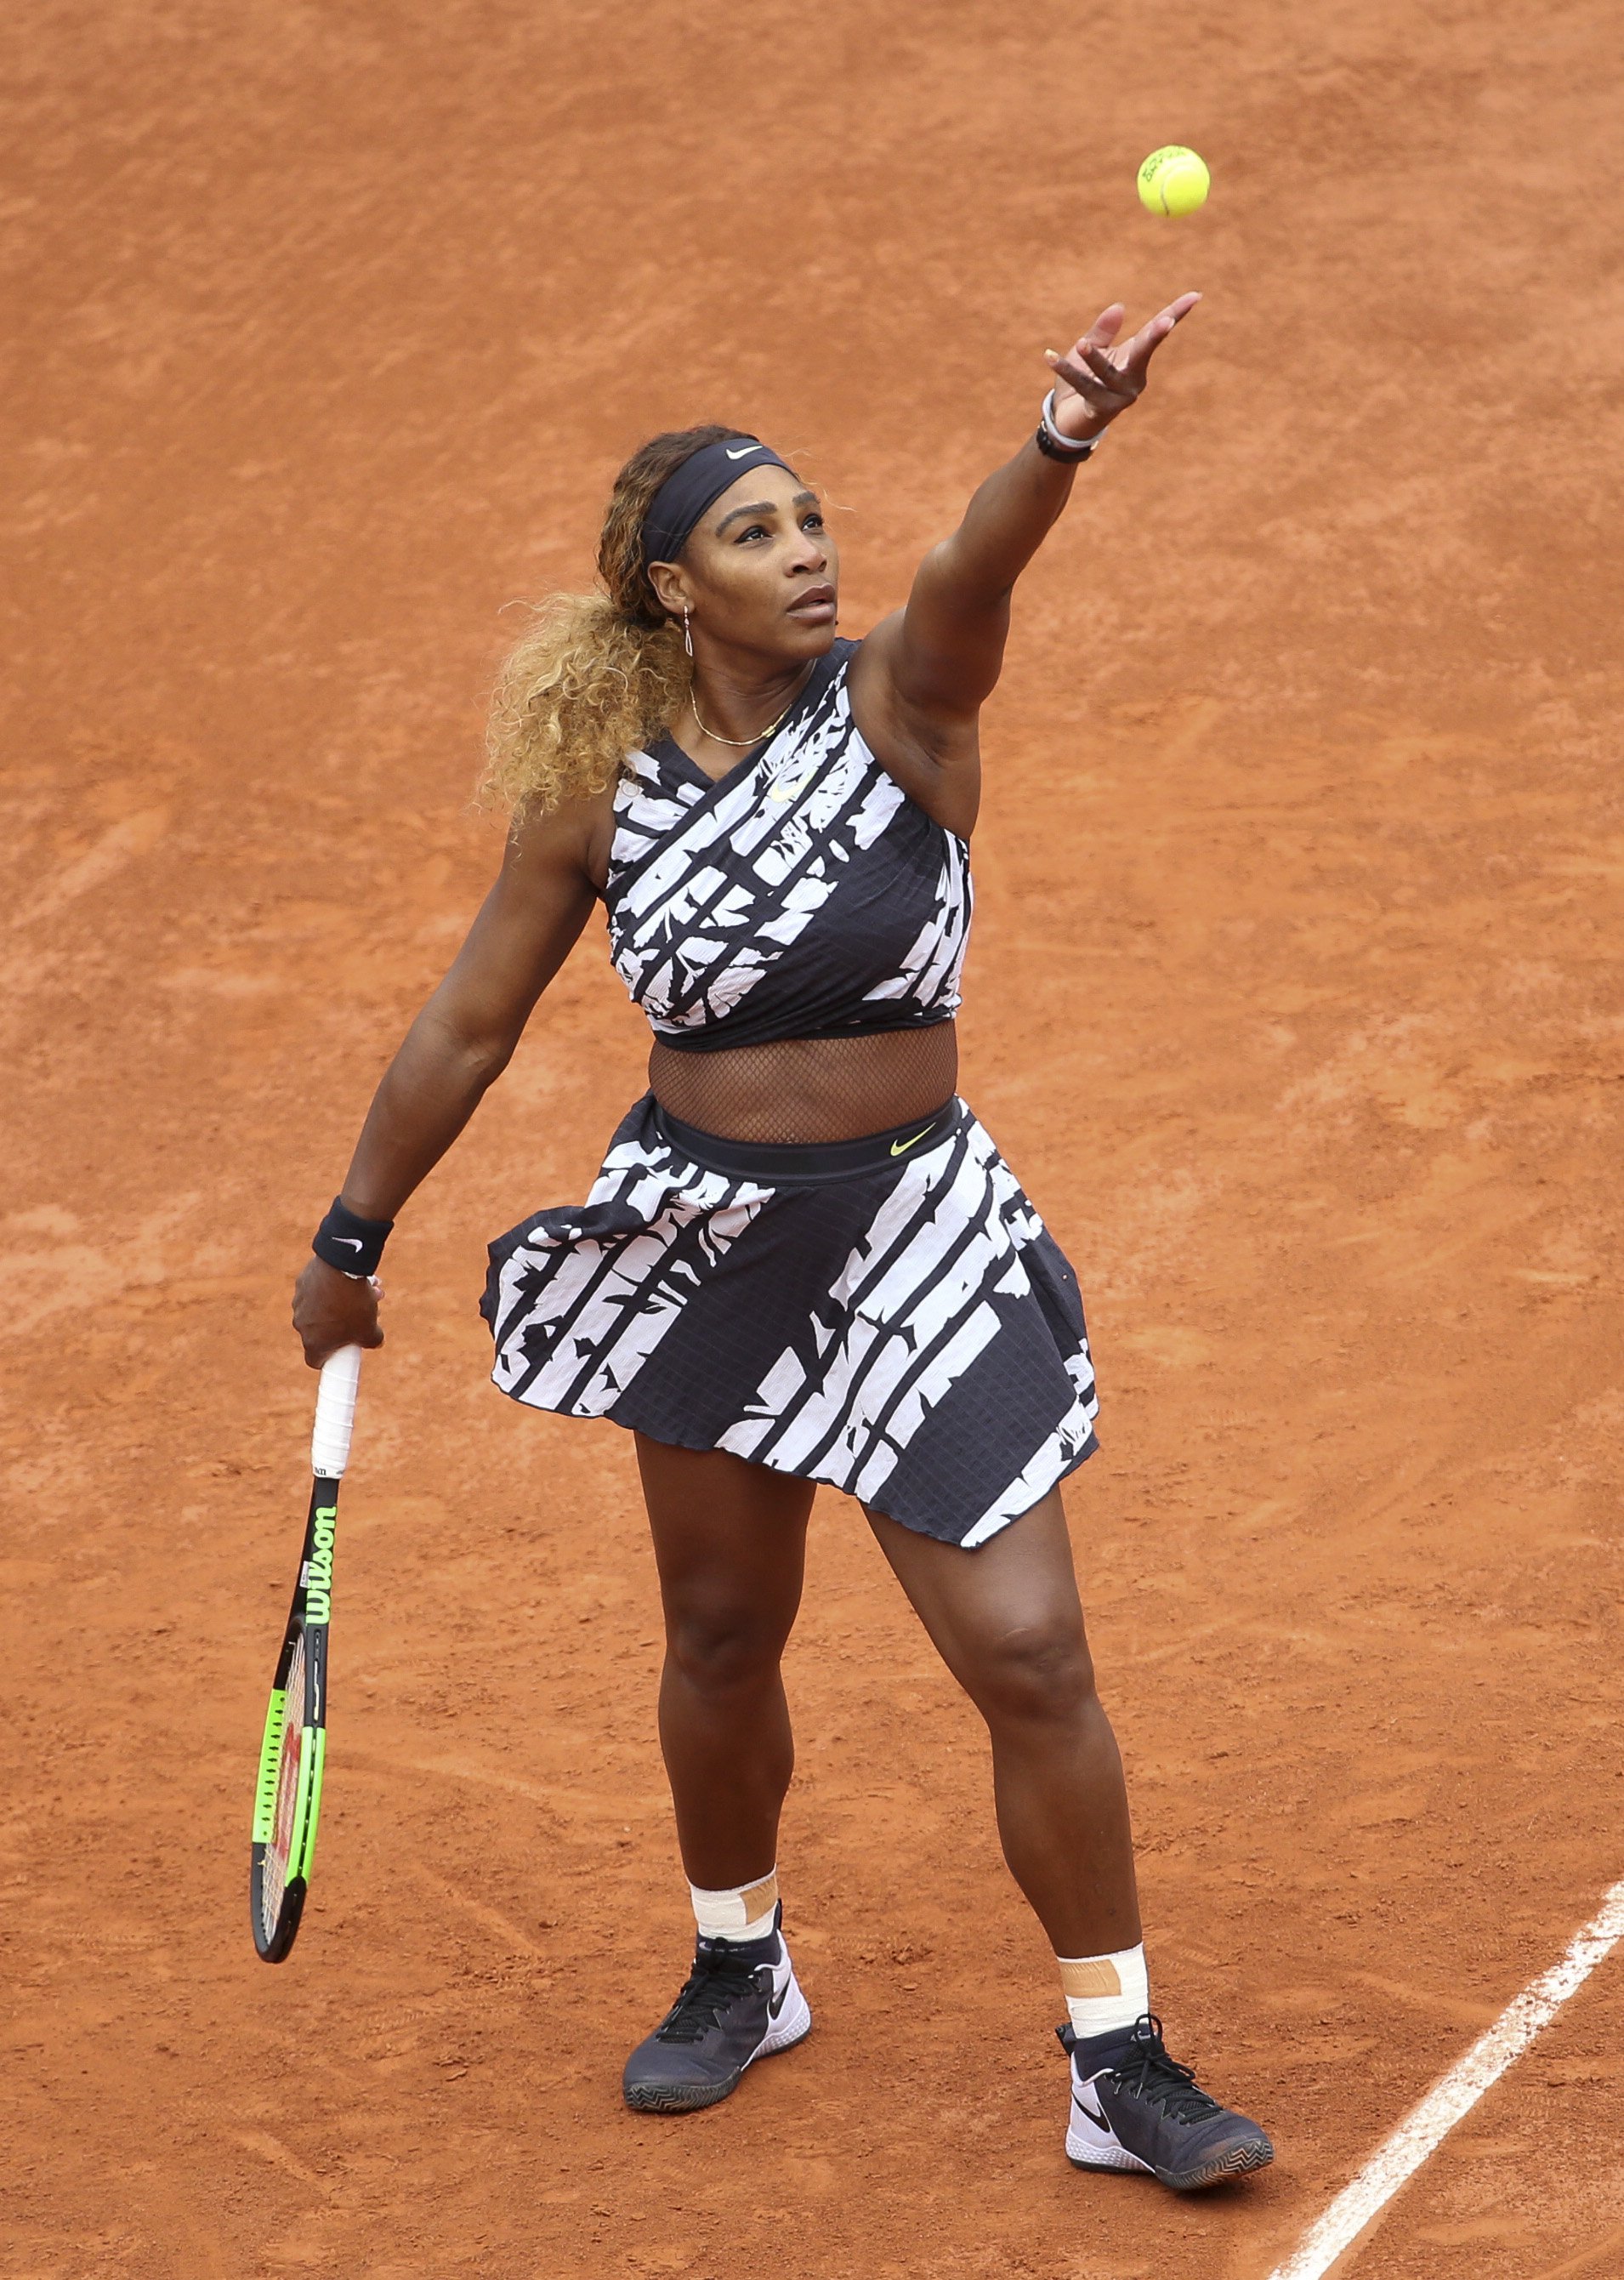 Serena Williams at the 2019 French Open in Paris, France on May 27, 2019. | Photo: Getty Images